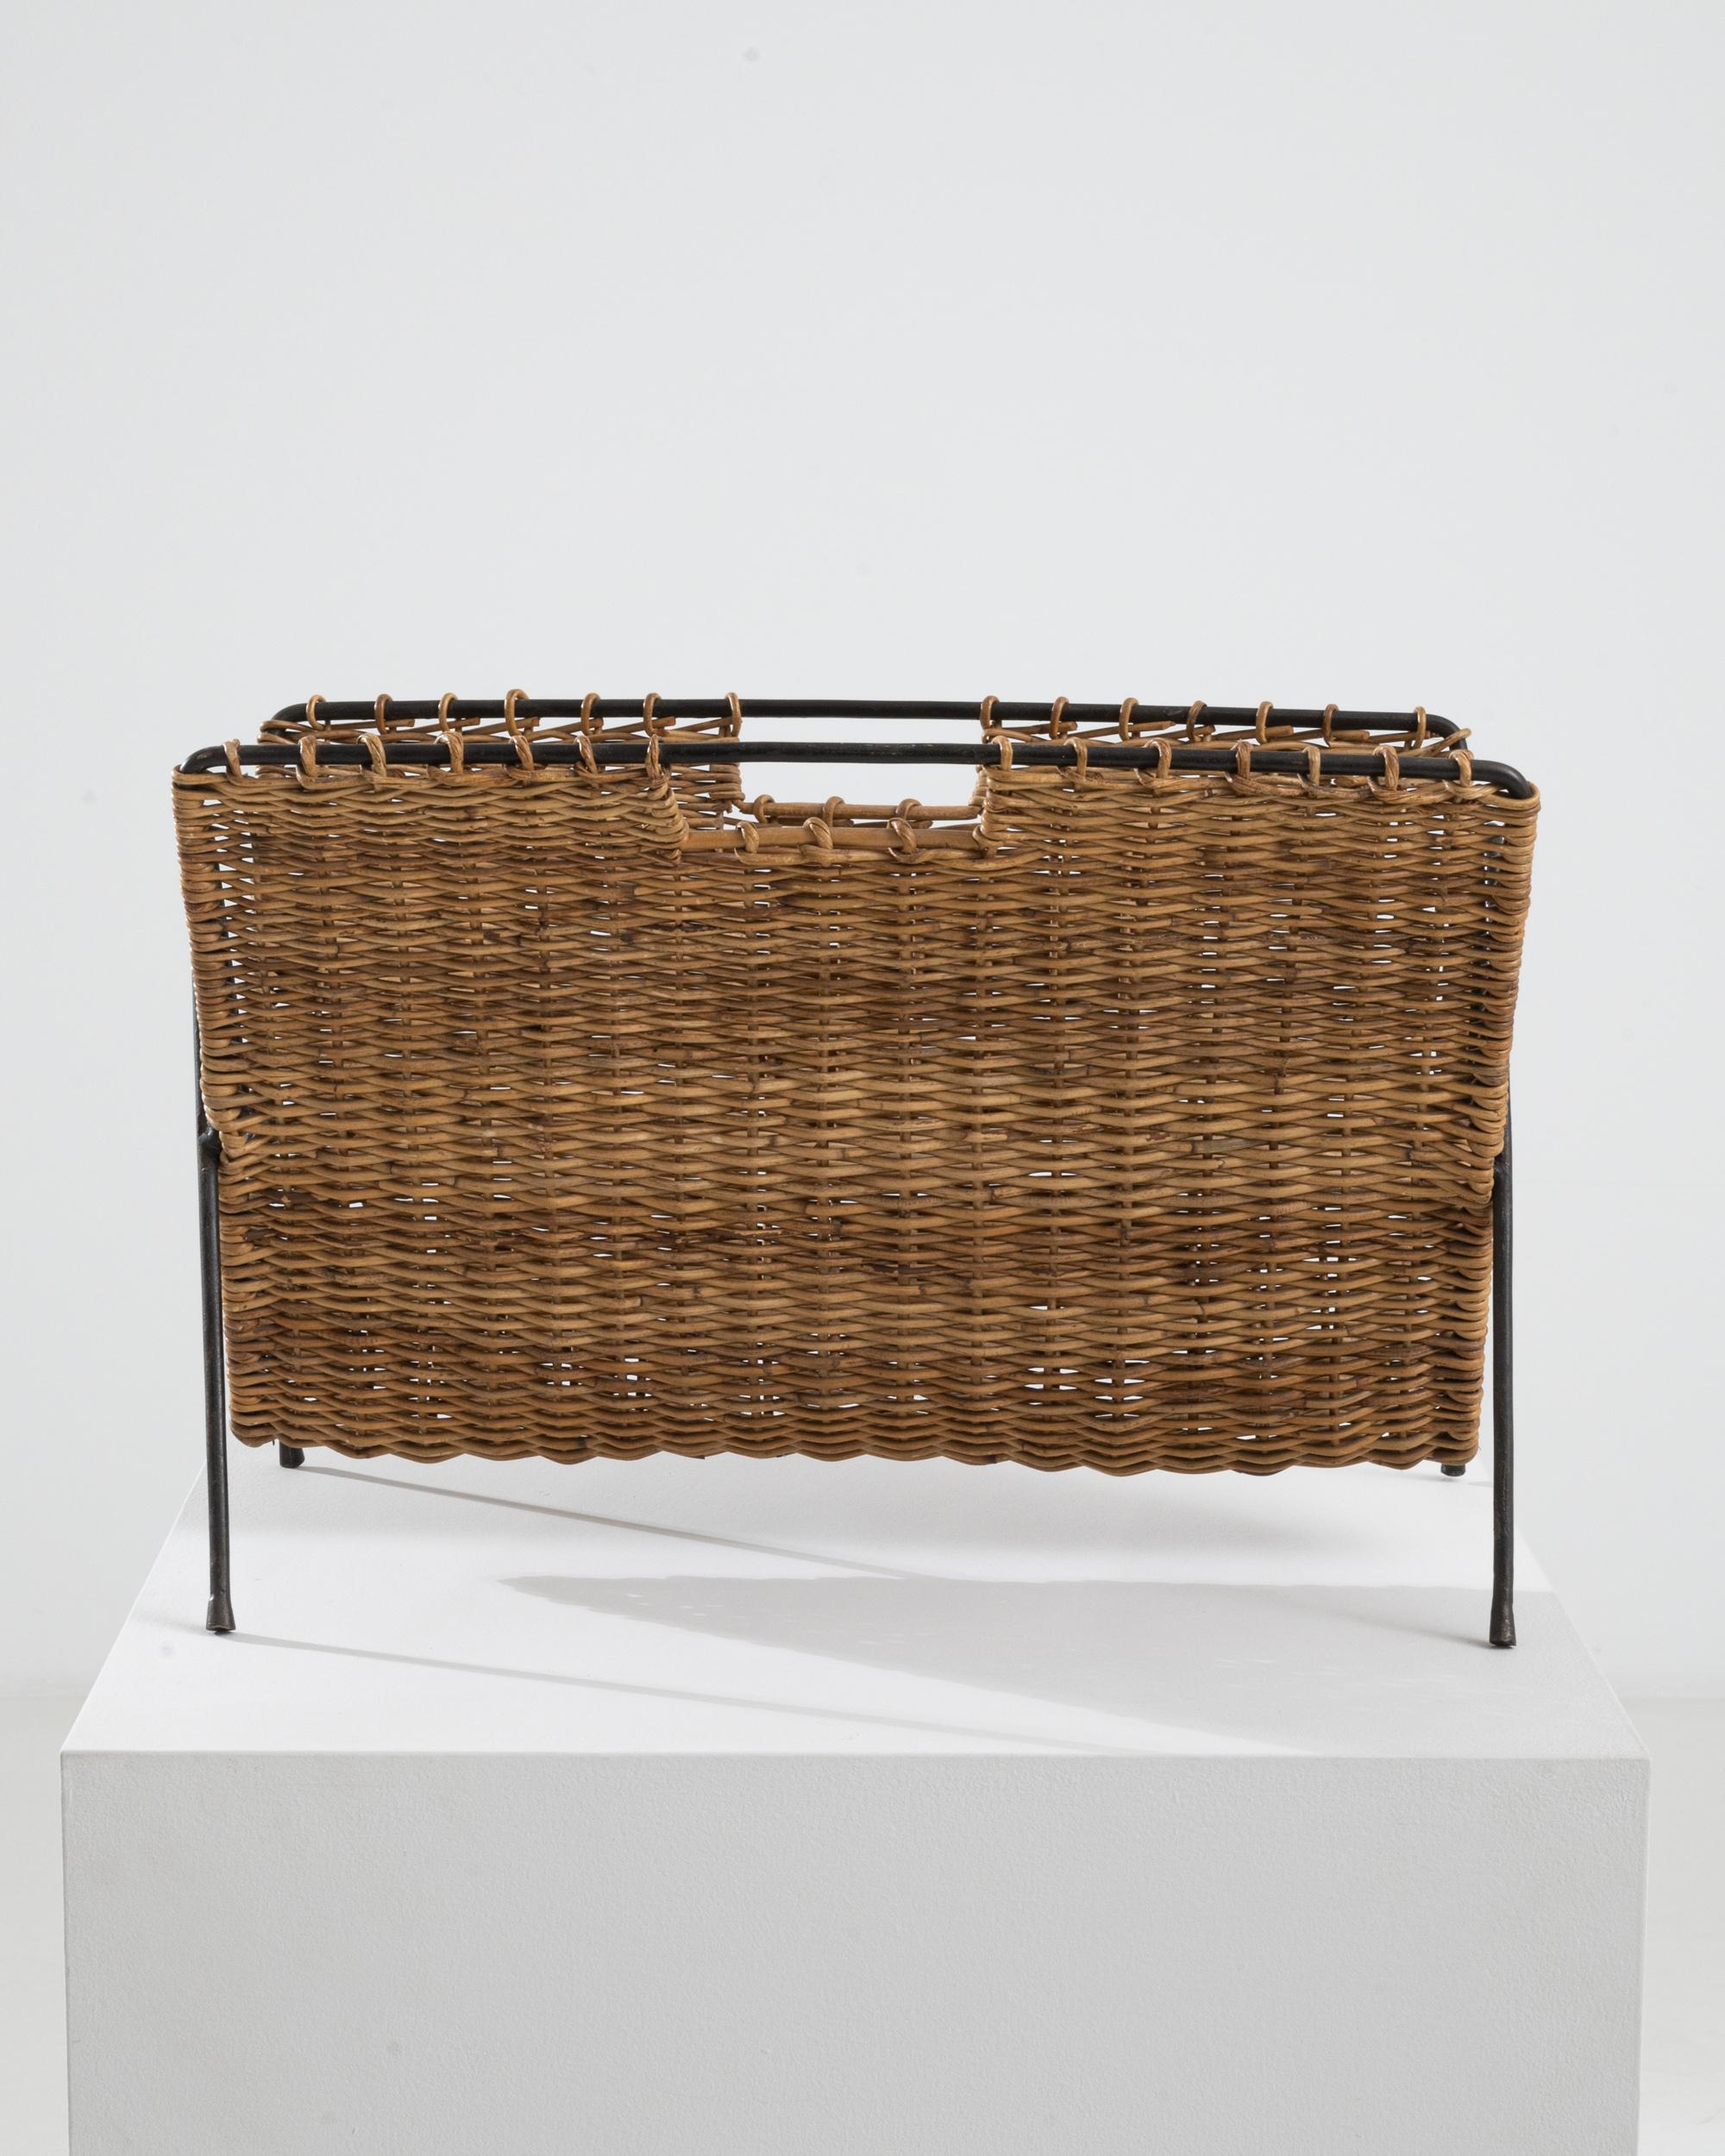 This vintage platter was made in France, circa 1960. A ‘V’ shaped caddy with a complimentary ‘A’ base, the woven Material finds its unlikely mate in the metal structure. Radiating 1960s charm, the metal feet give an anamorphic quality. Cane is woven